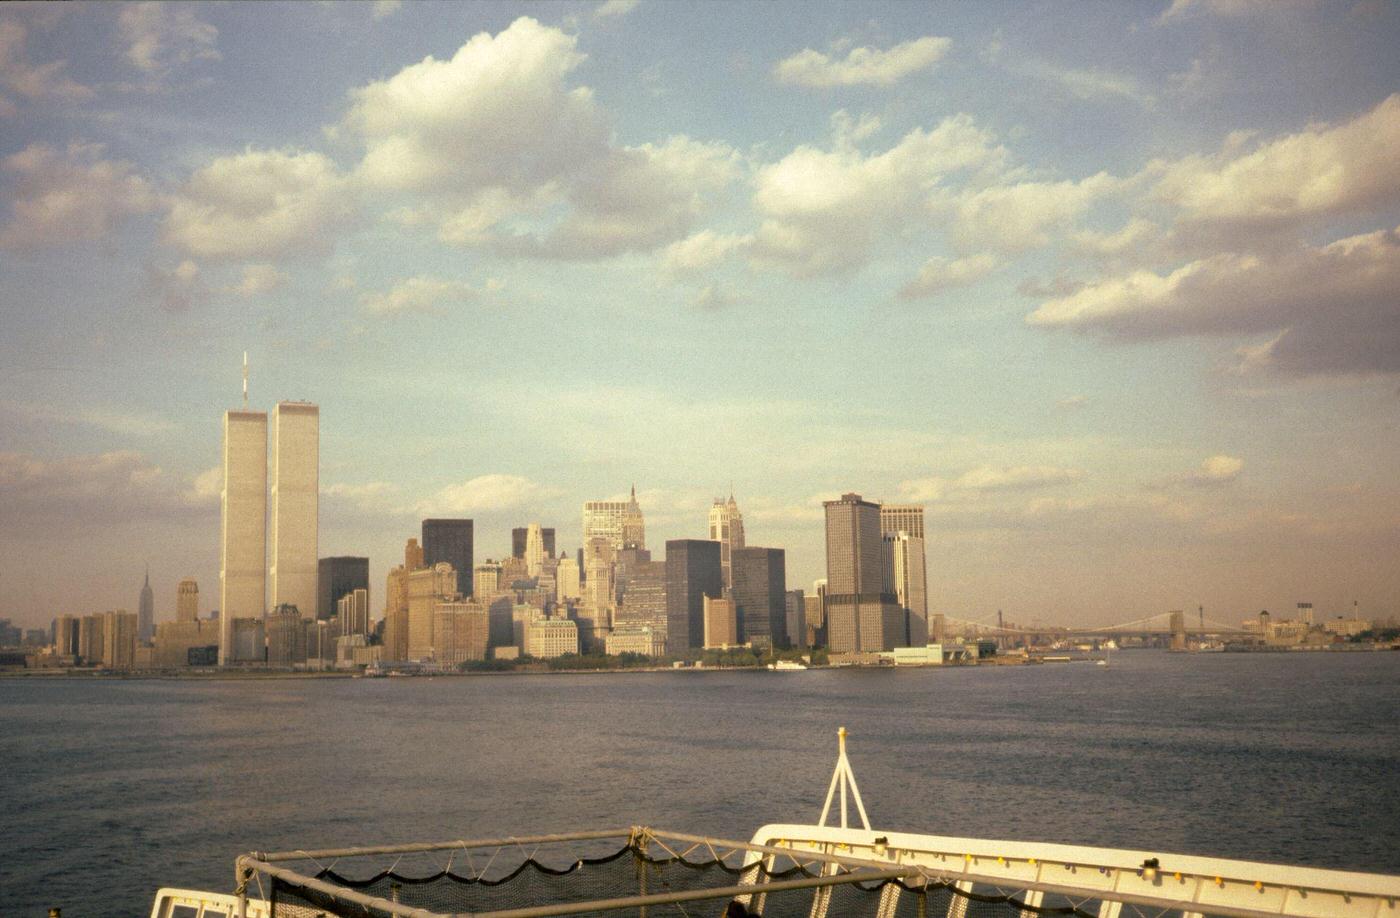 Twin Towers Of The World Trade Center Viewed From The Aft Deck Of The Cunard Line'S Queen Elizabeth 2 Cruise Ship In Manhattan, 1975.